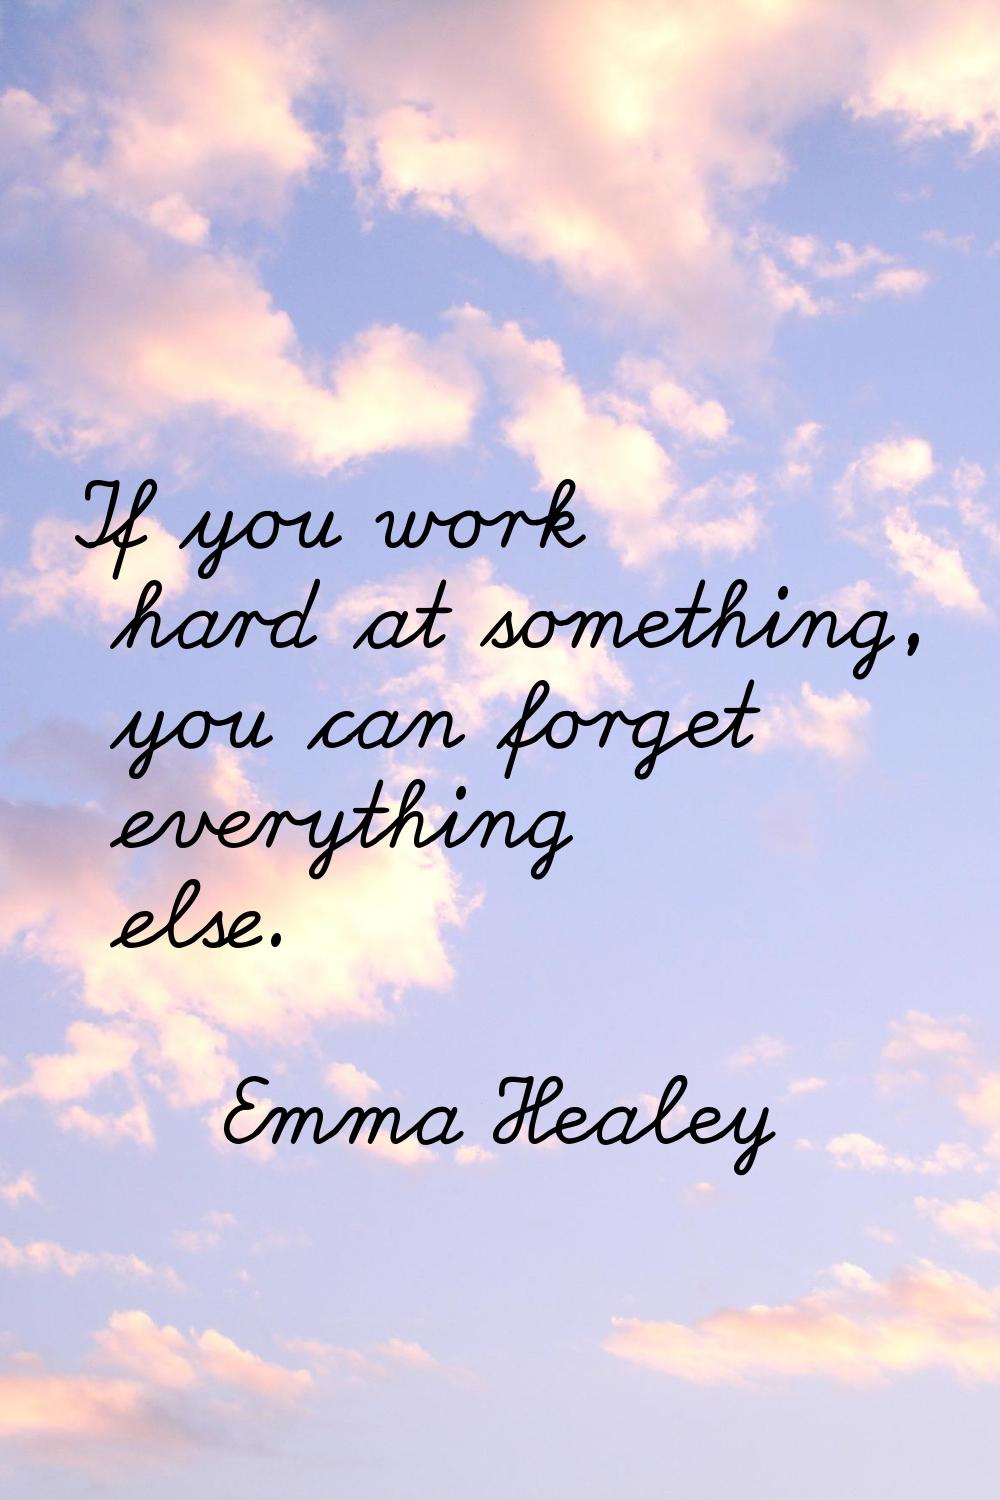 If you work hard at something, you can forget everything else.